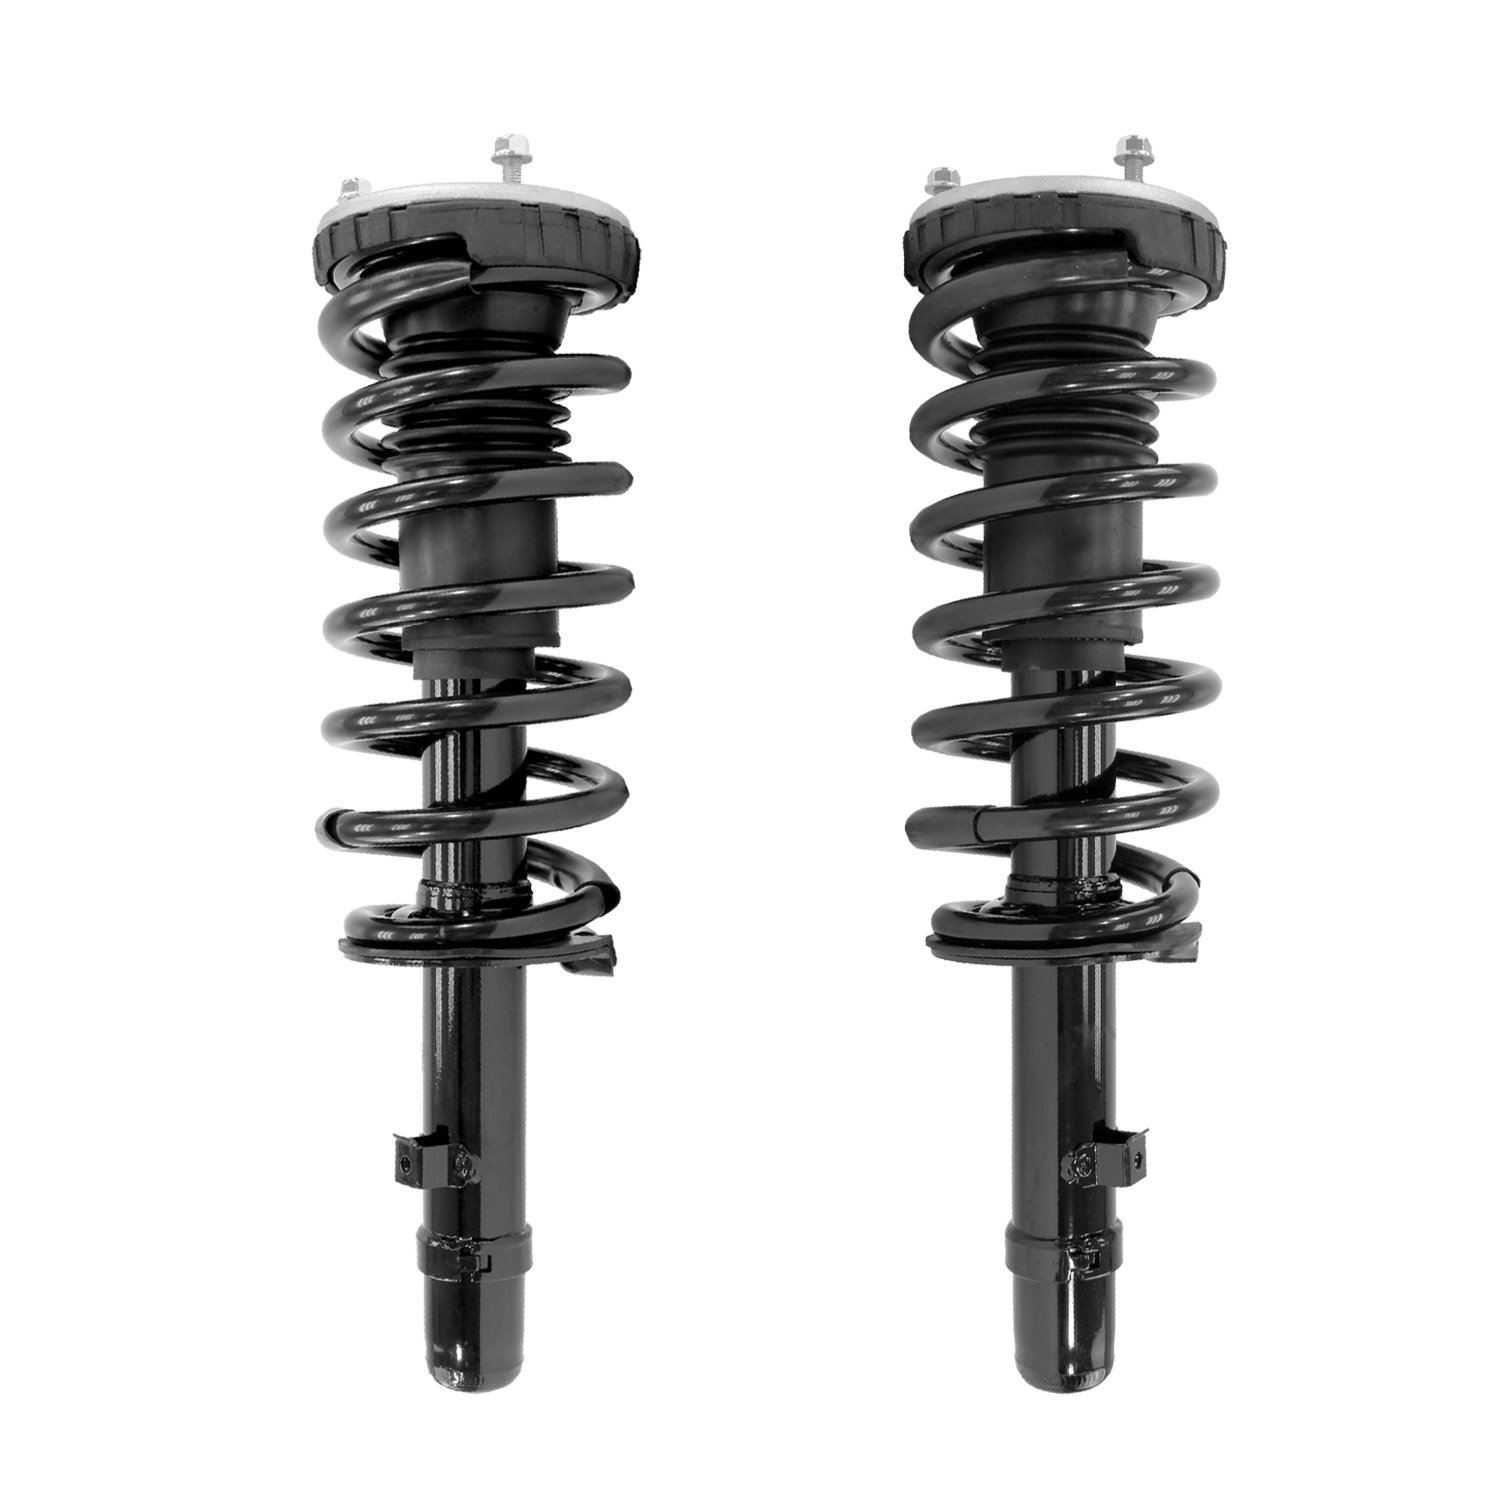 2-13591-13592-001 Front Suspension Strut & Coil Spring Assemby Set Fits Select Genesis G80, Hyundai Genesis